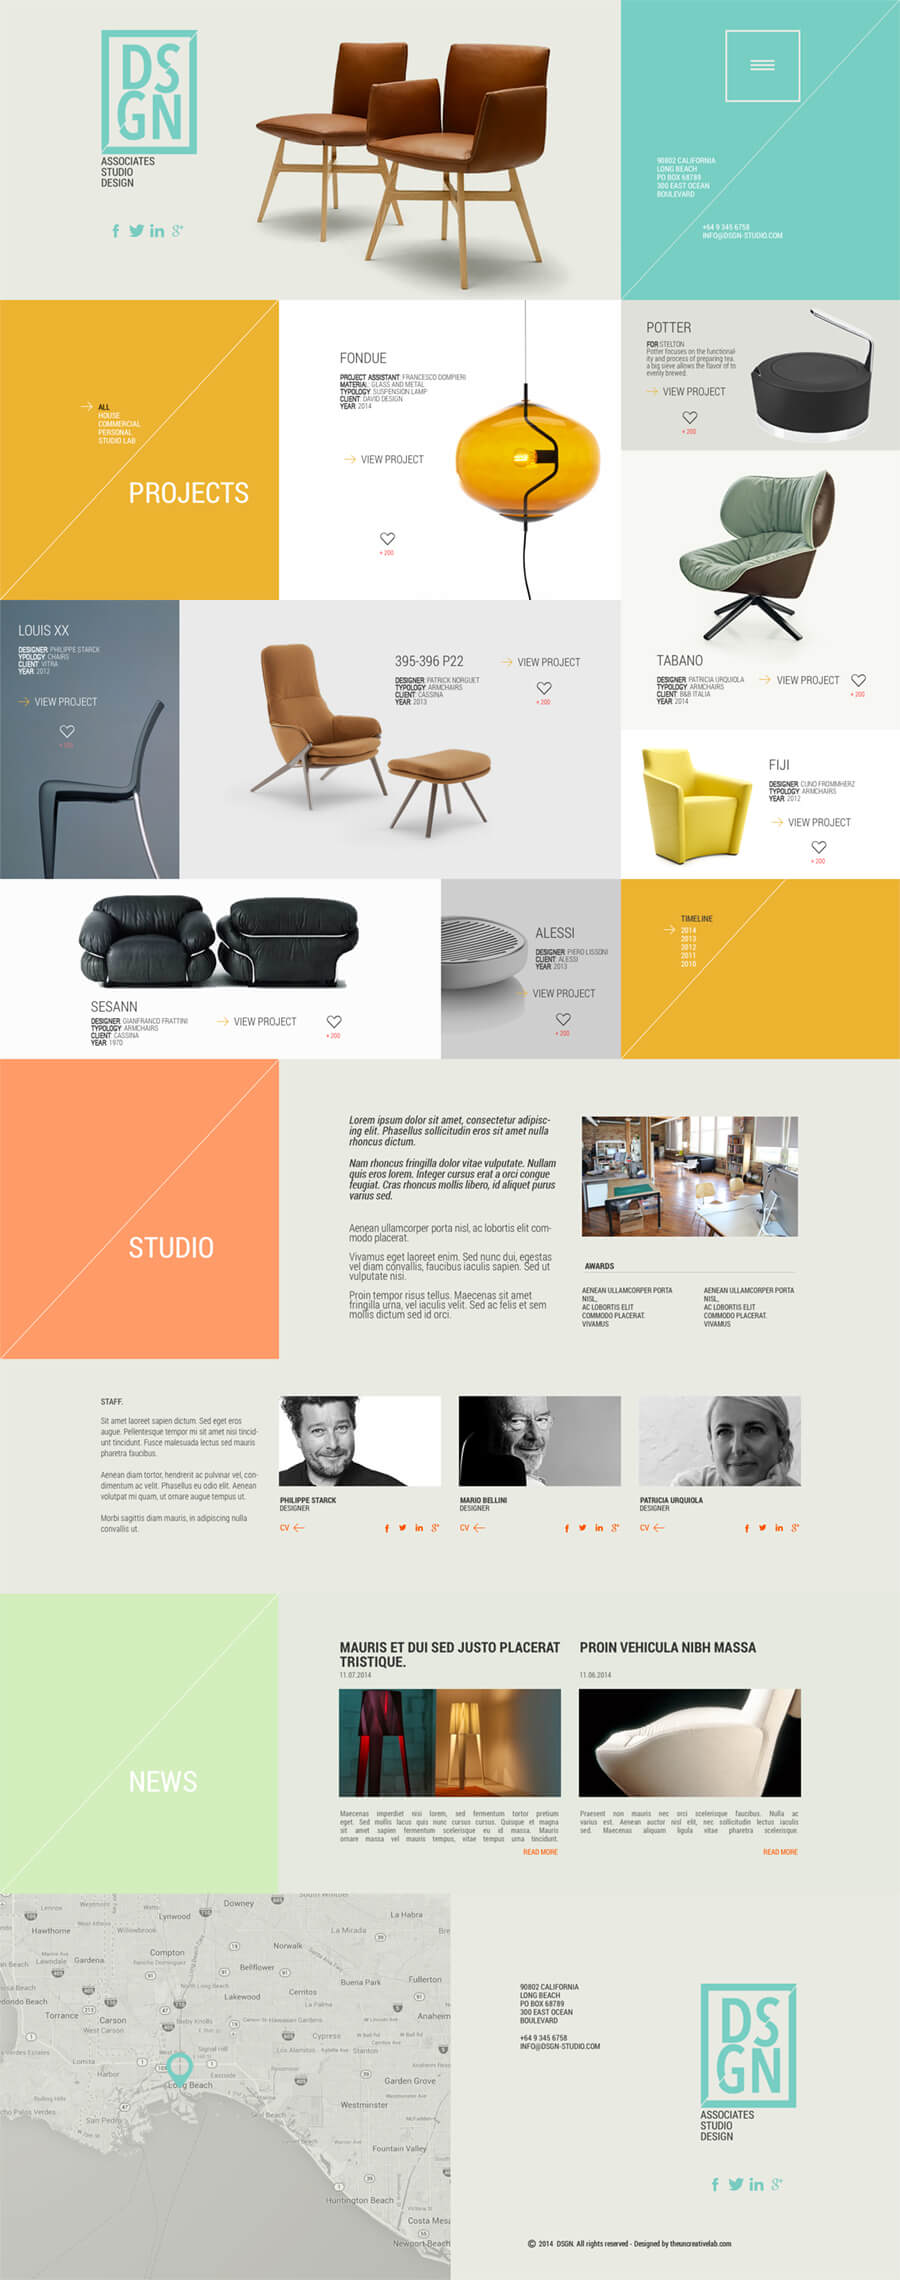 dsgn-free-psd-template-full